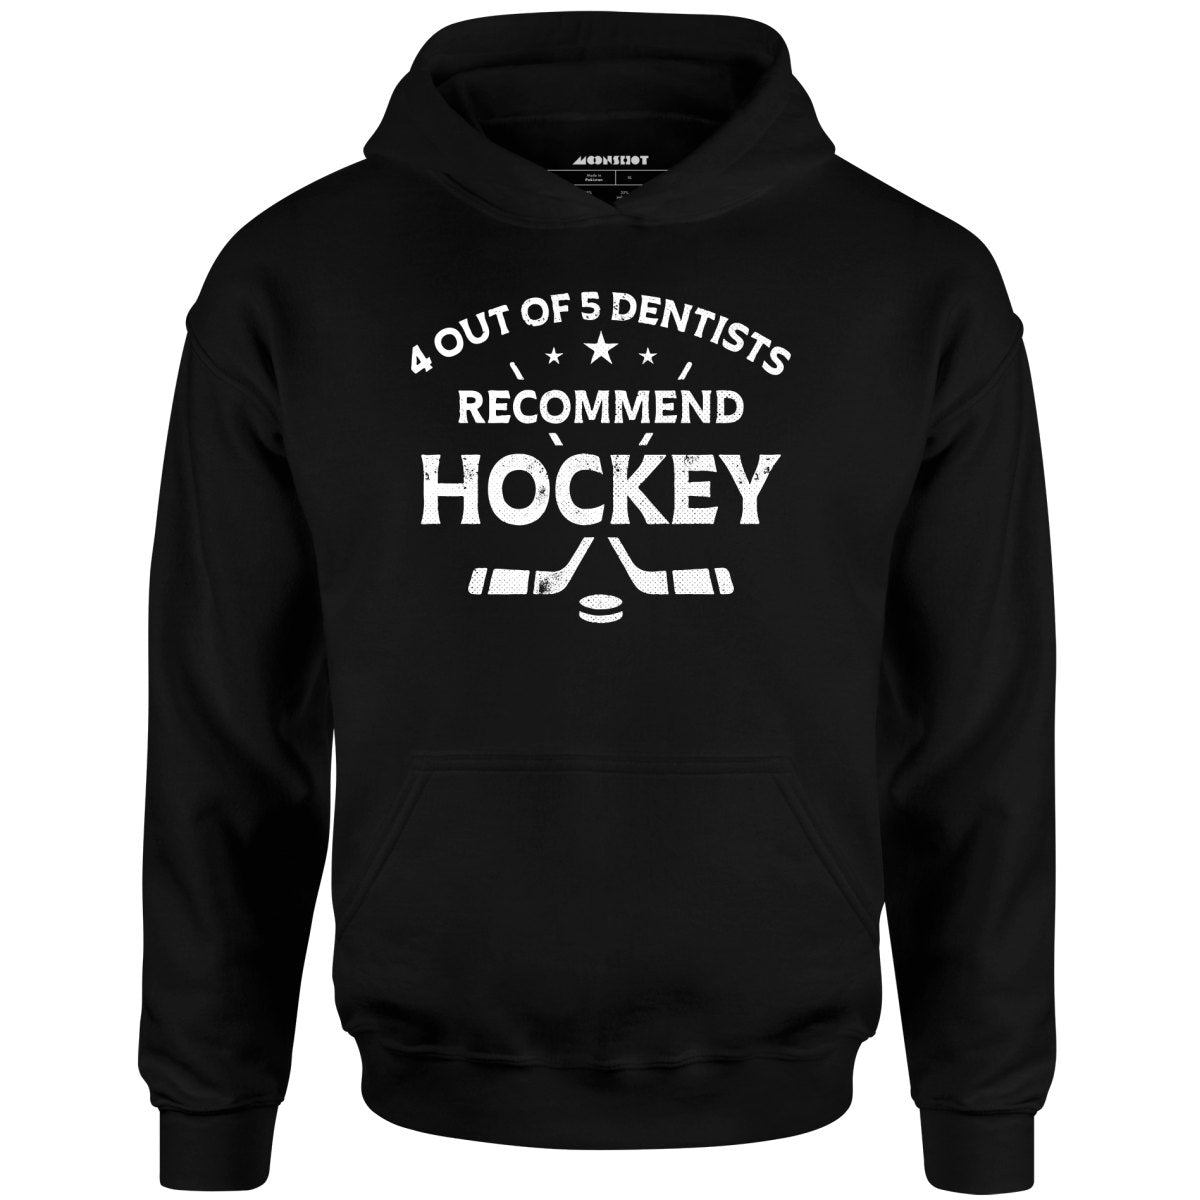 4 Out of 5 Dentists Recommend Hockey - Unisex Hoodie